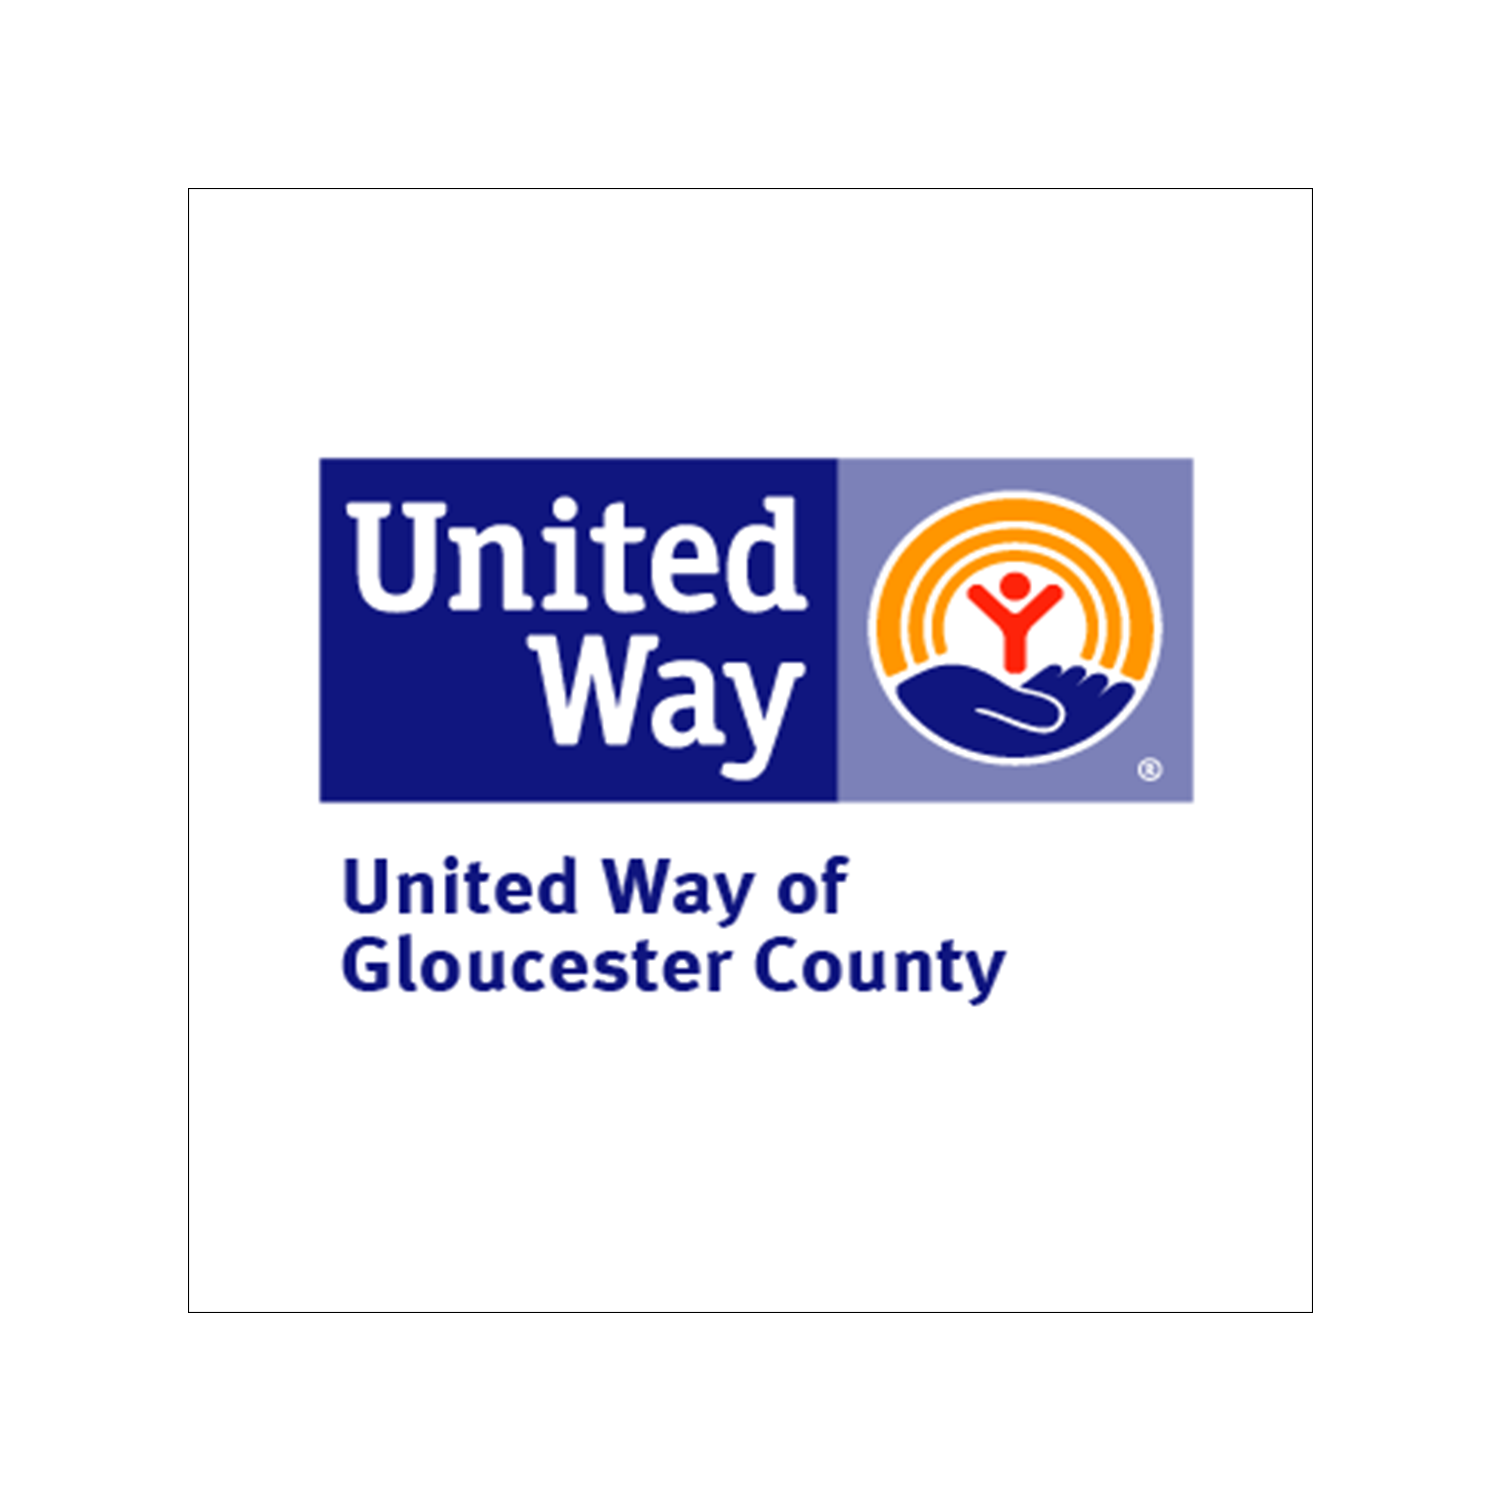 United Way of Gloucester County